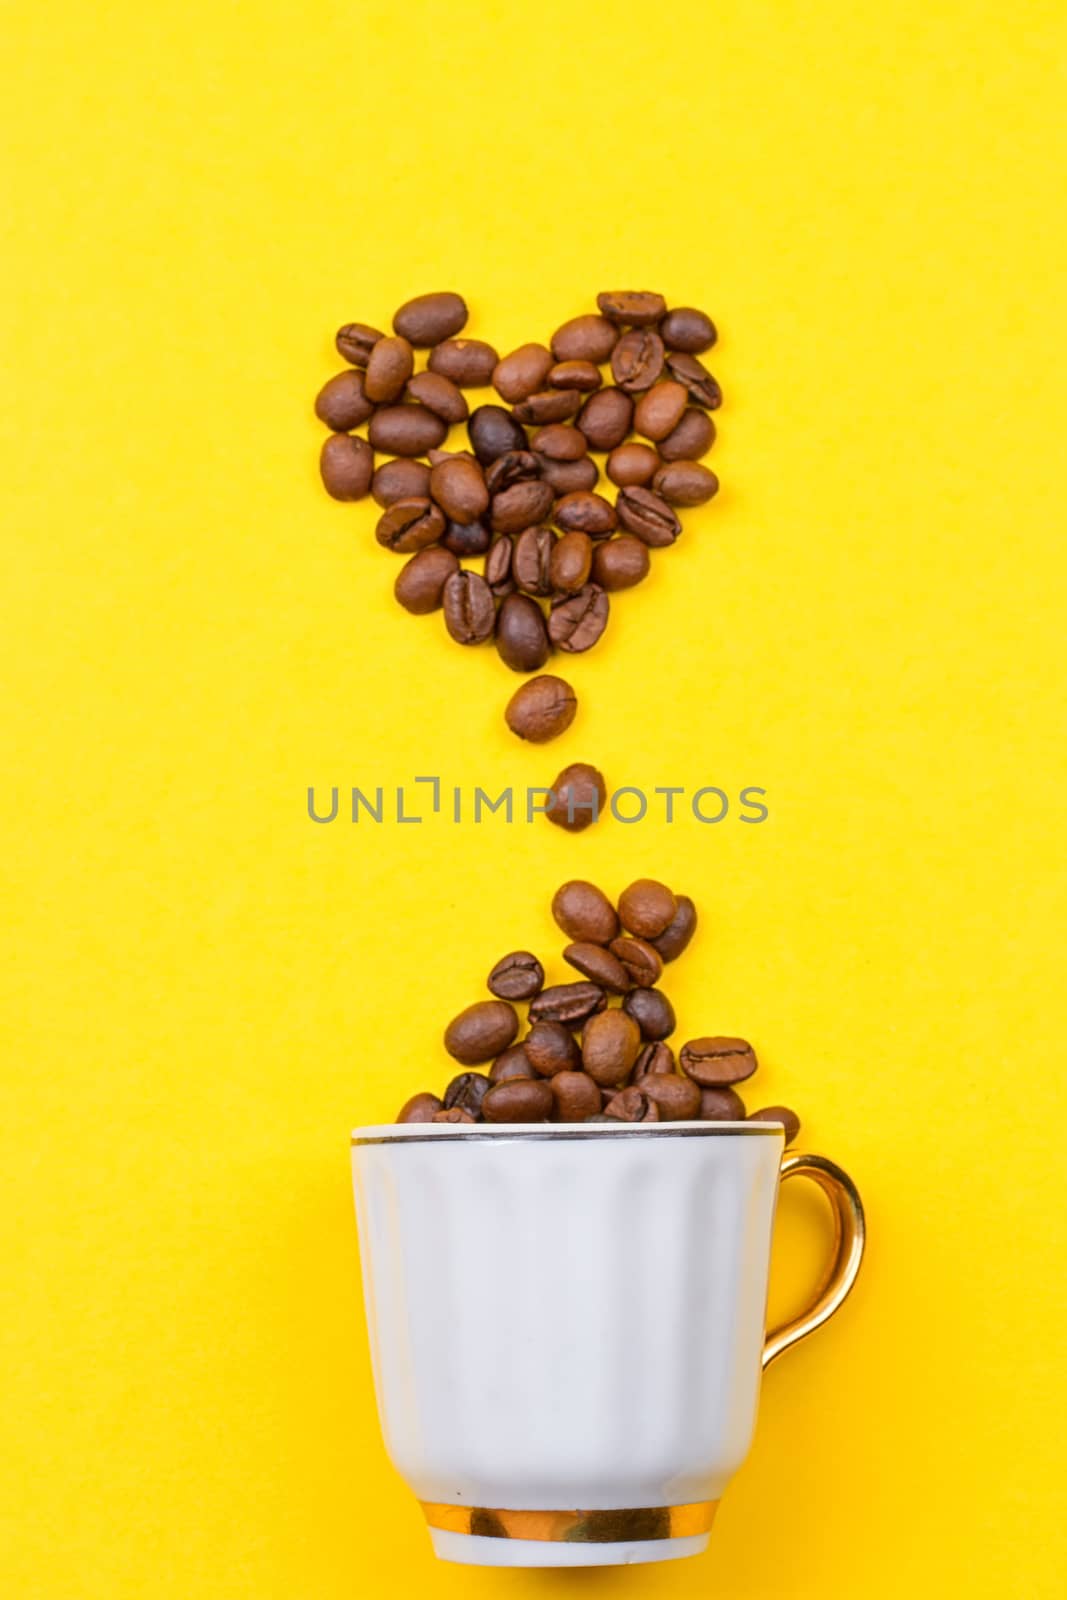 A cup of coffee and heart of the beans by victosha